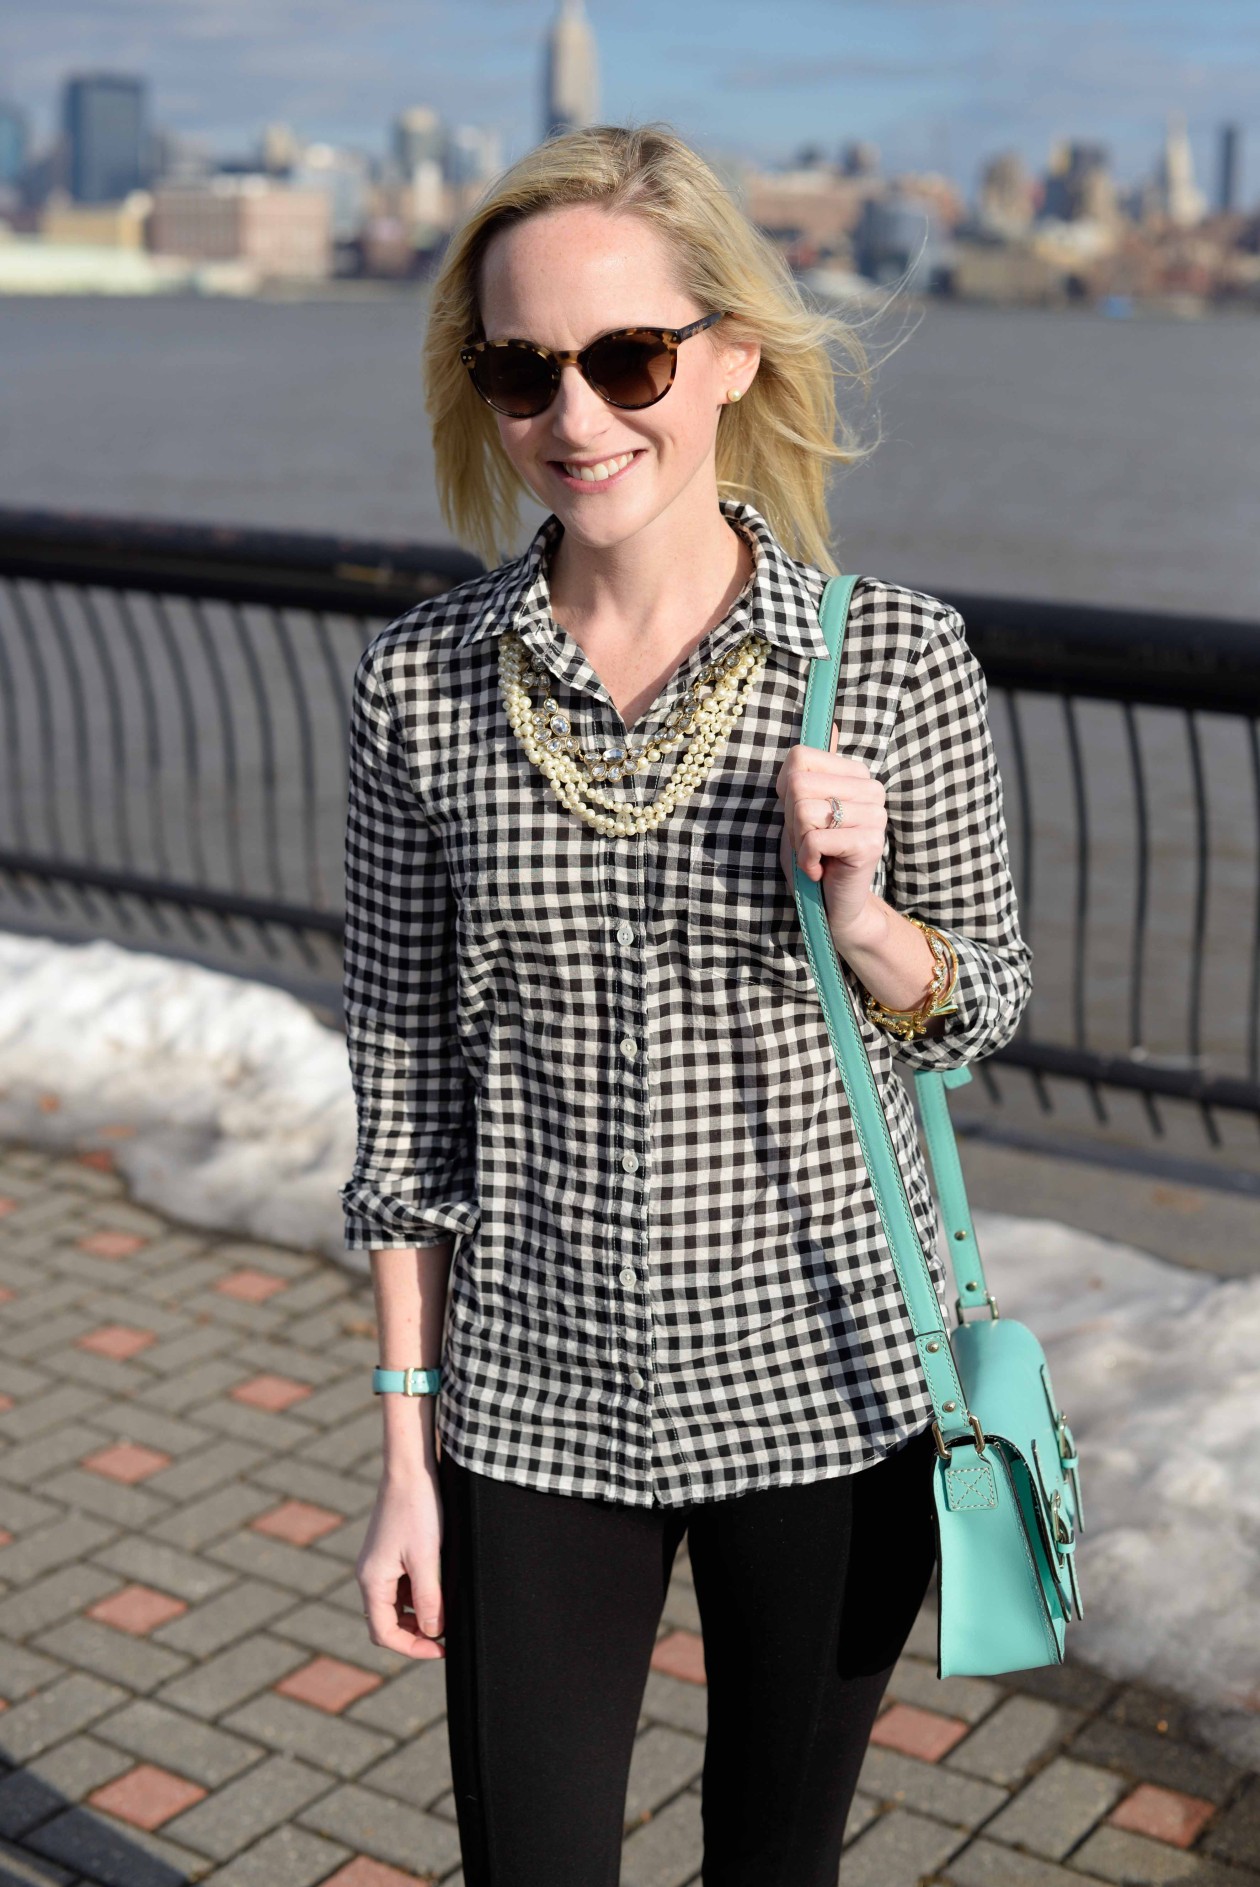 Sunny Weekend Days: Checked Shirts and Mint Accents